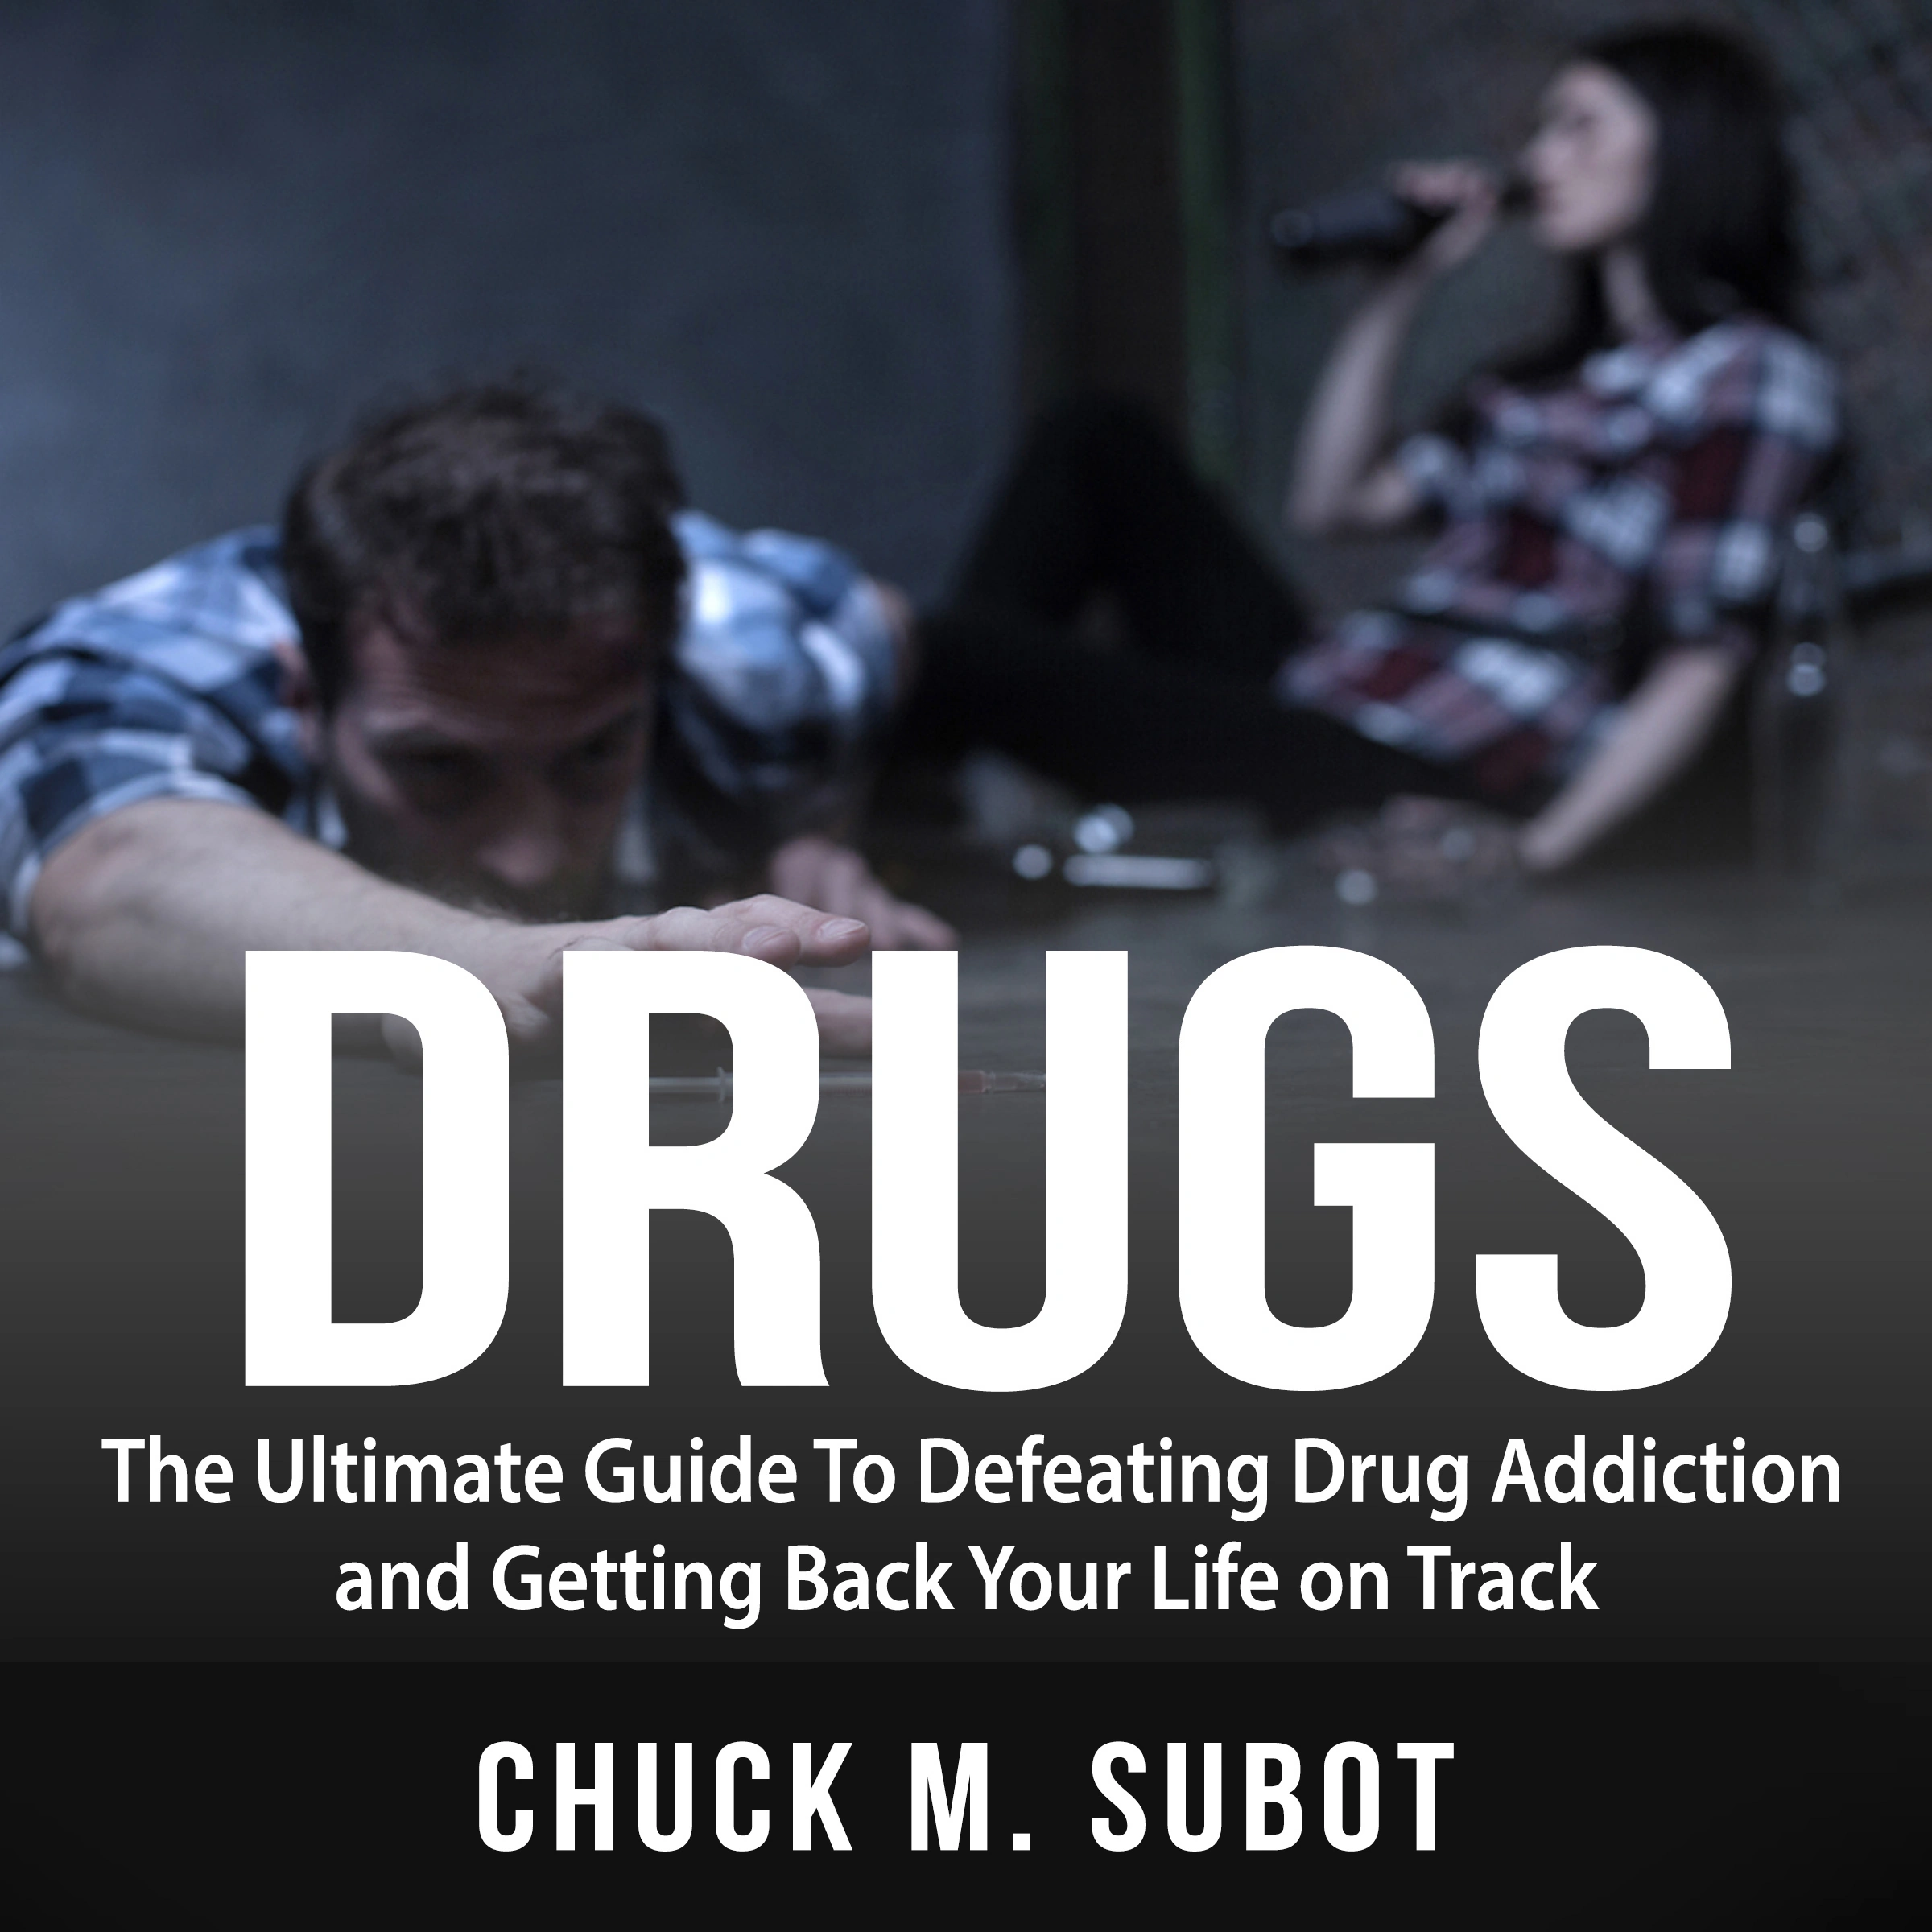 Drugs: The Ultimate Guide To Defeating Drug Addiction and Getting Back Your Life on Track Audiobook by Chuck M. Subot